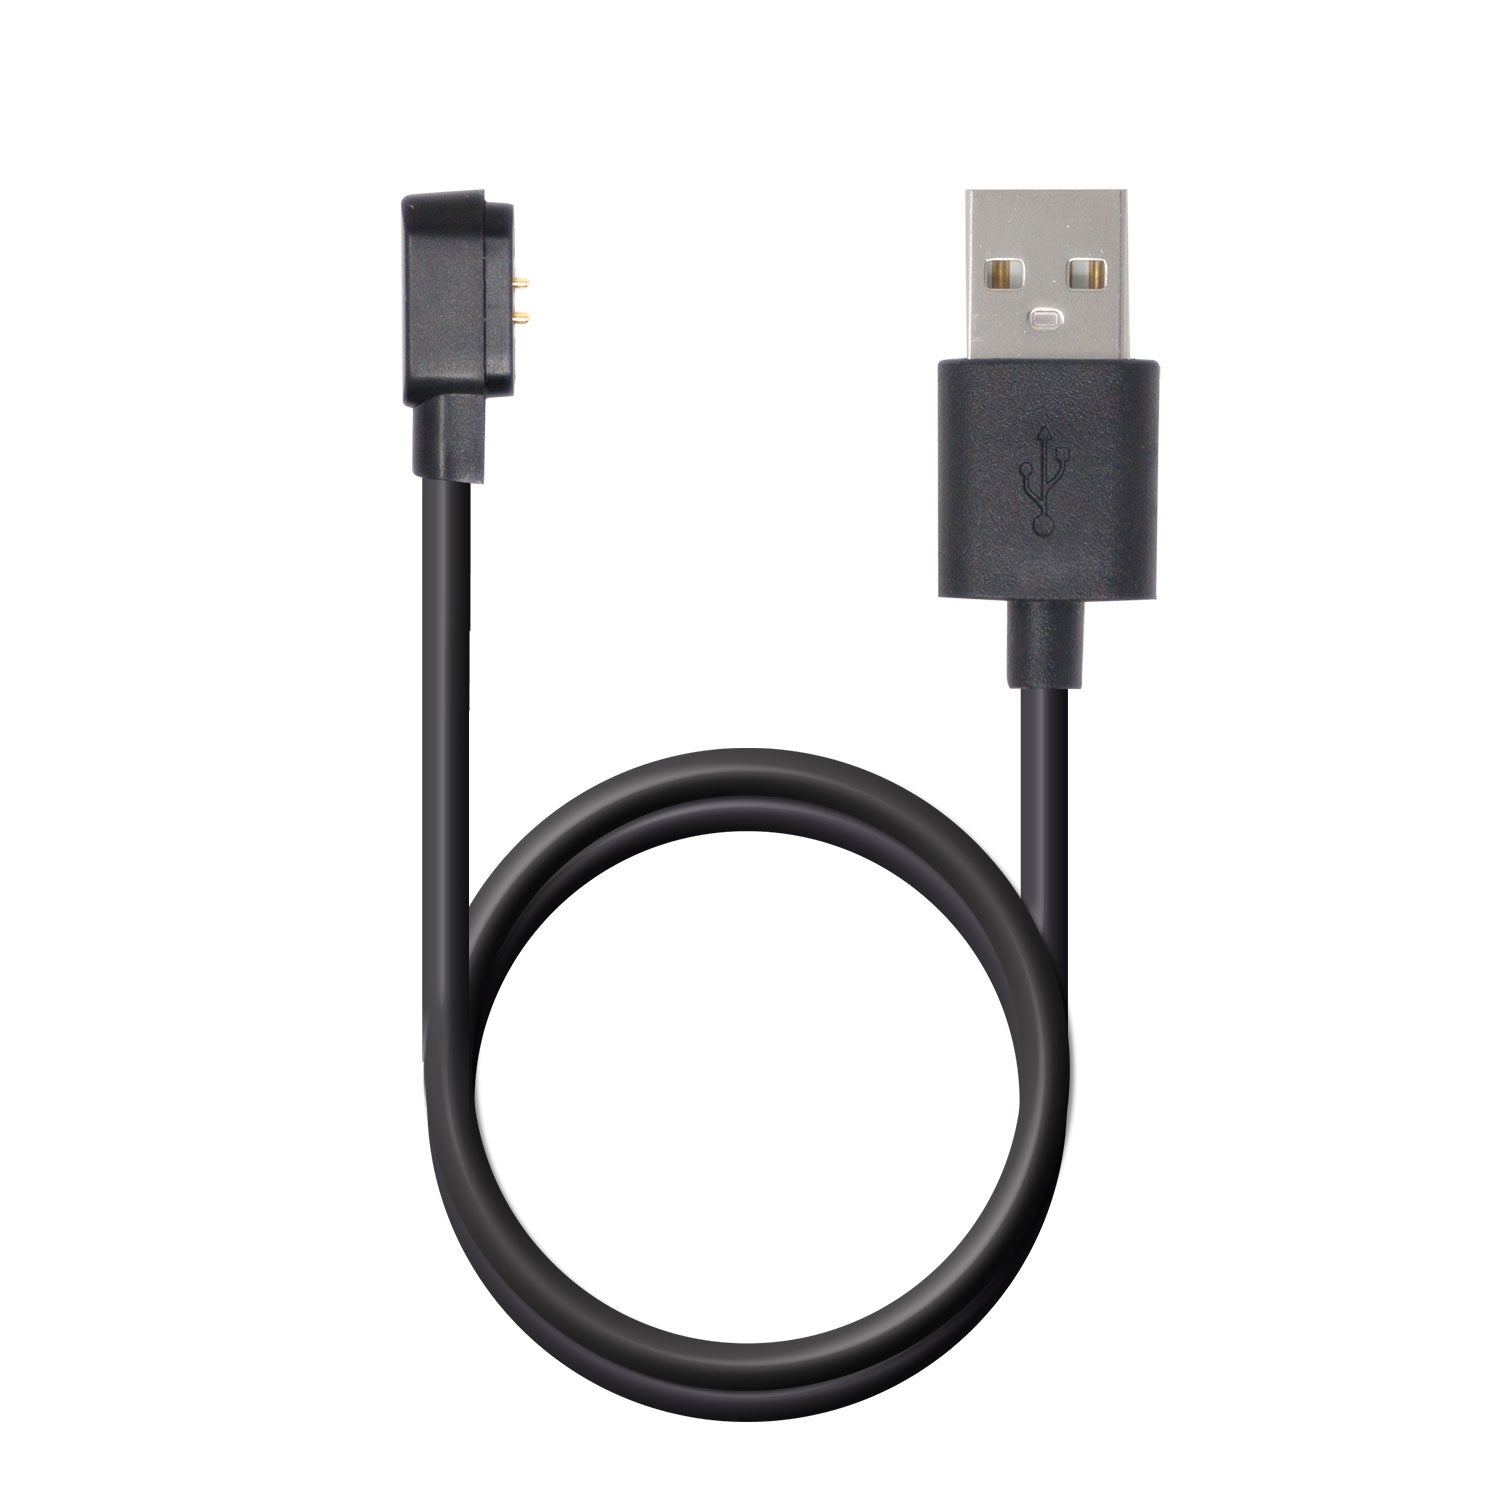 3Plus Charger Cable (HR+, Vibe+ and Vibe Lite)